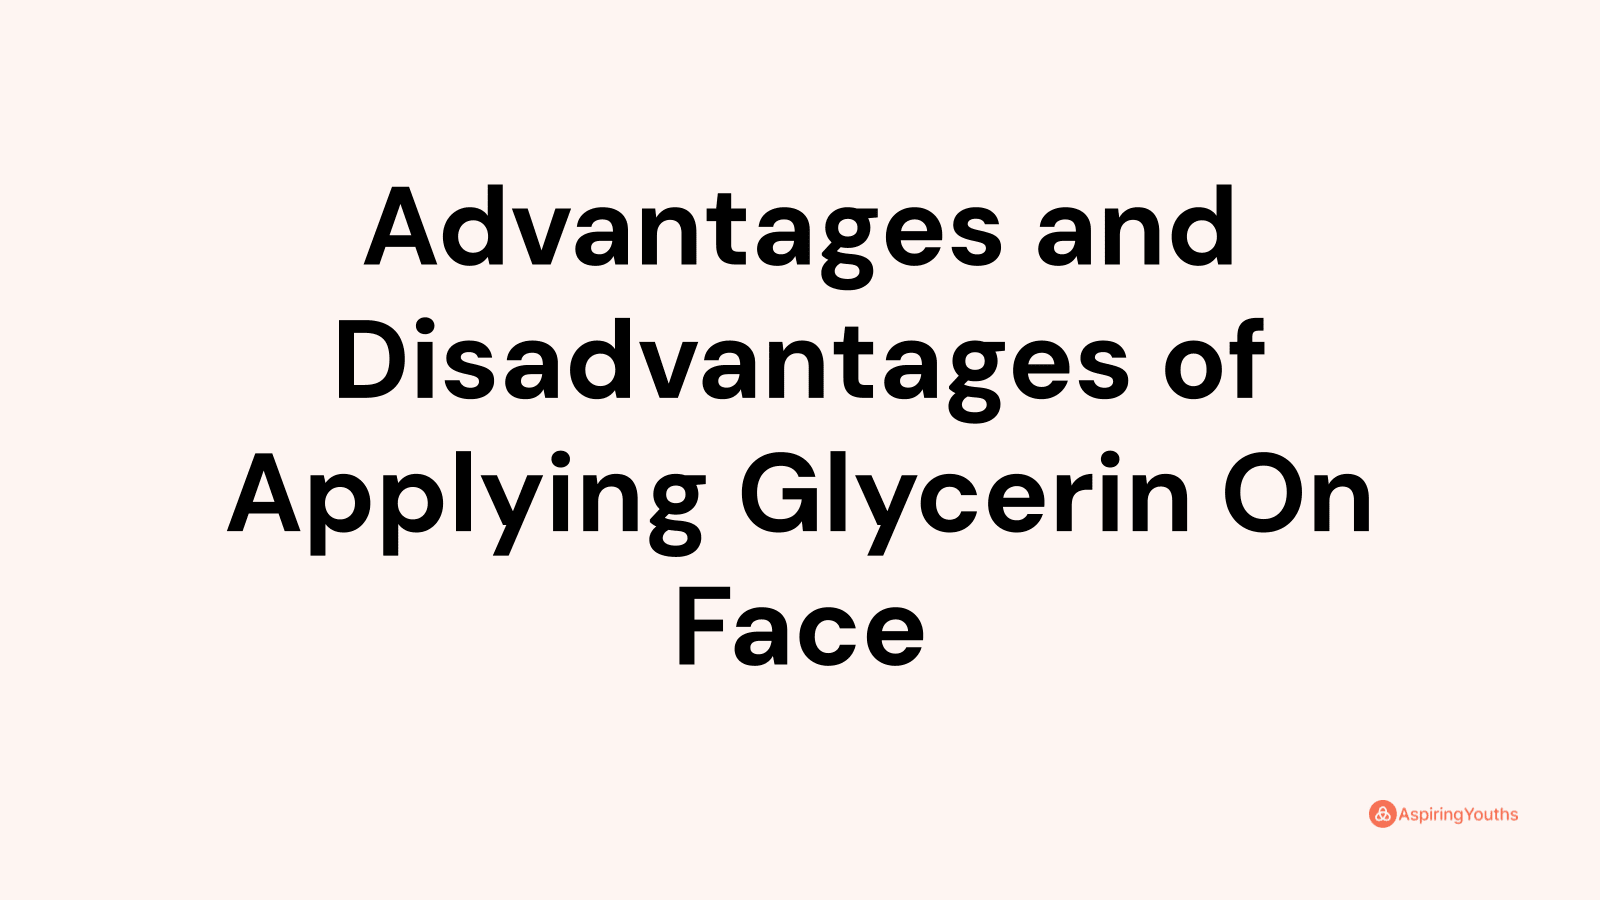 Advantages and disadvantages of Applying Glycerin On Face